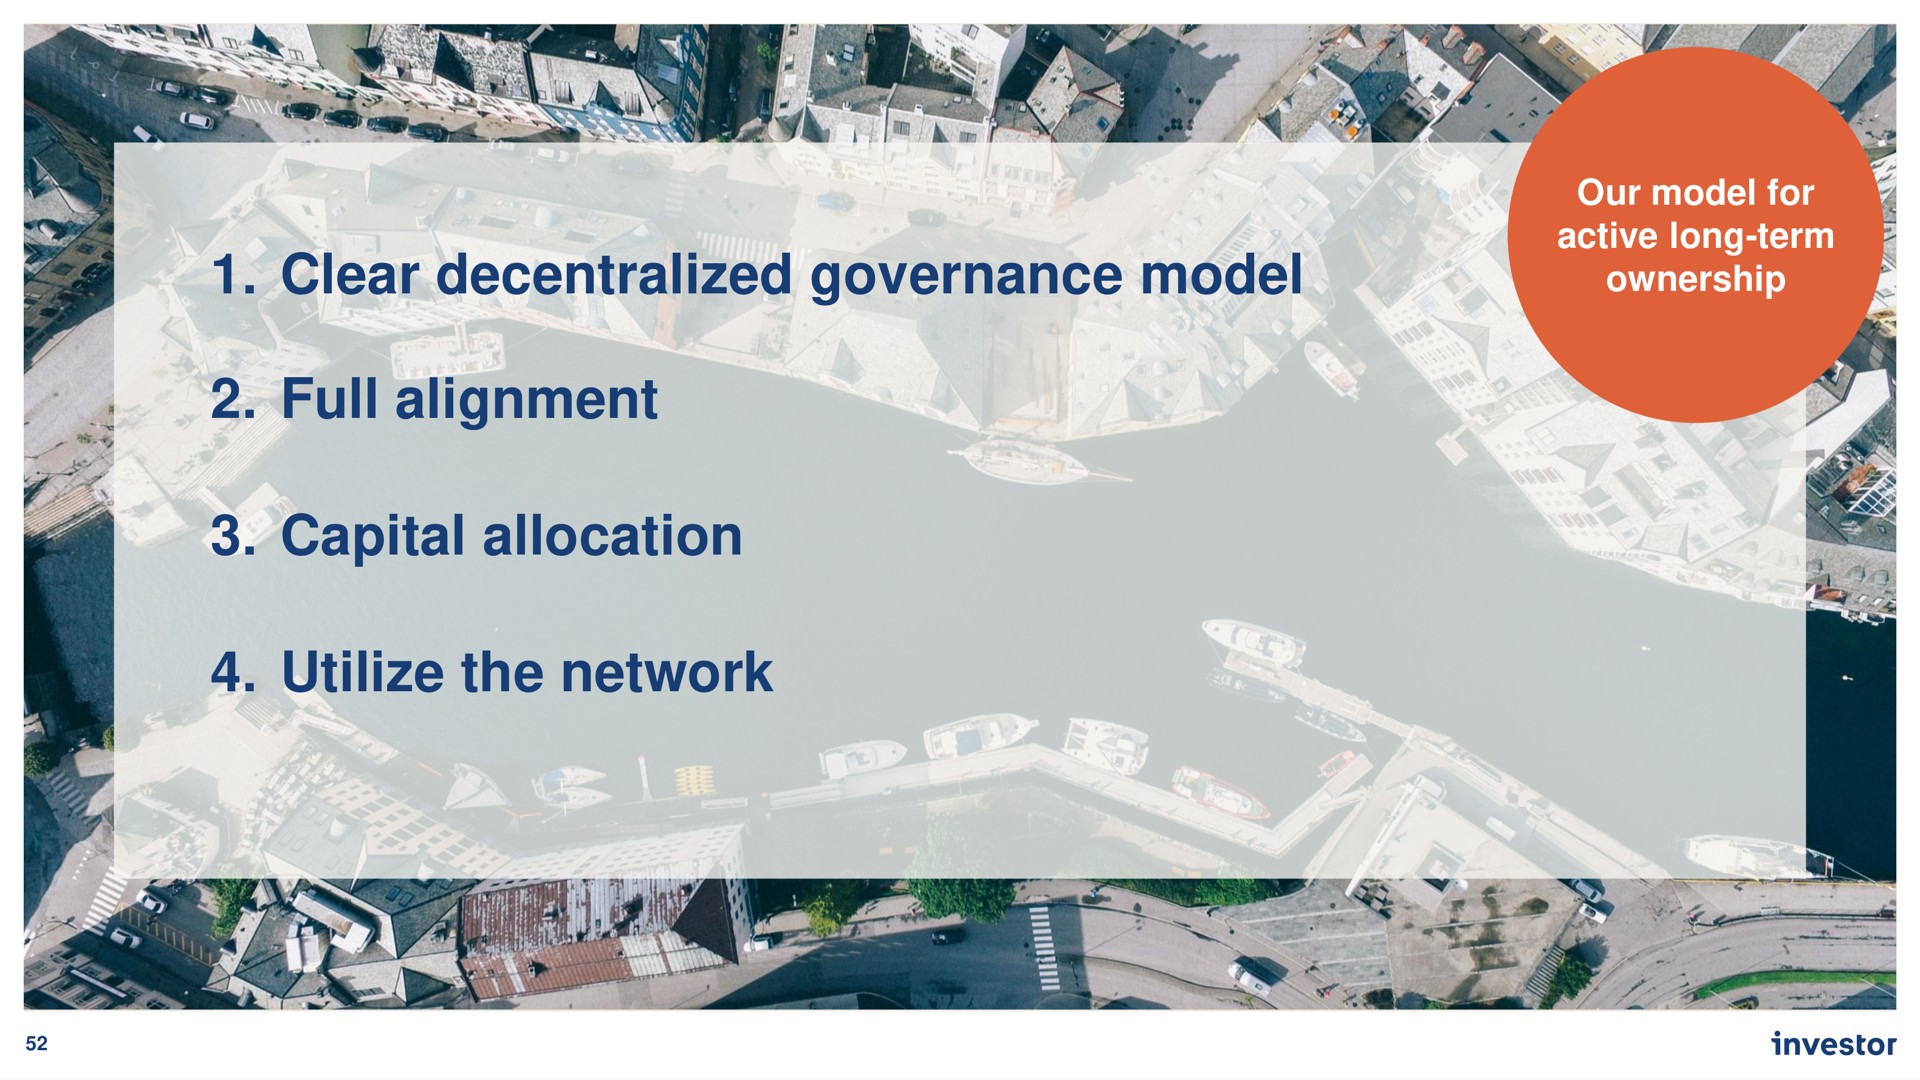 clear decentralized governance model full alignment capital allocation utilize the network | Investor AB